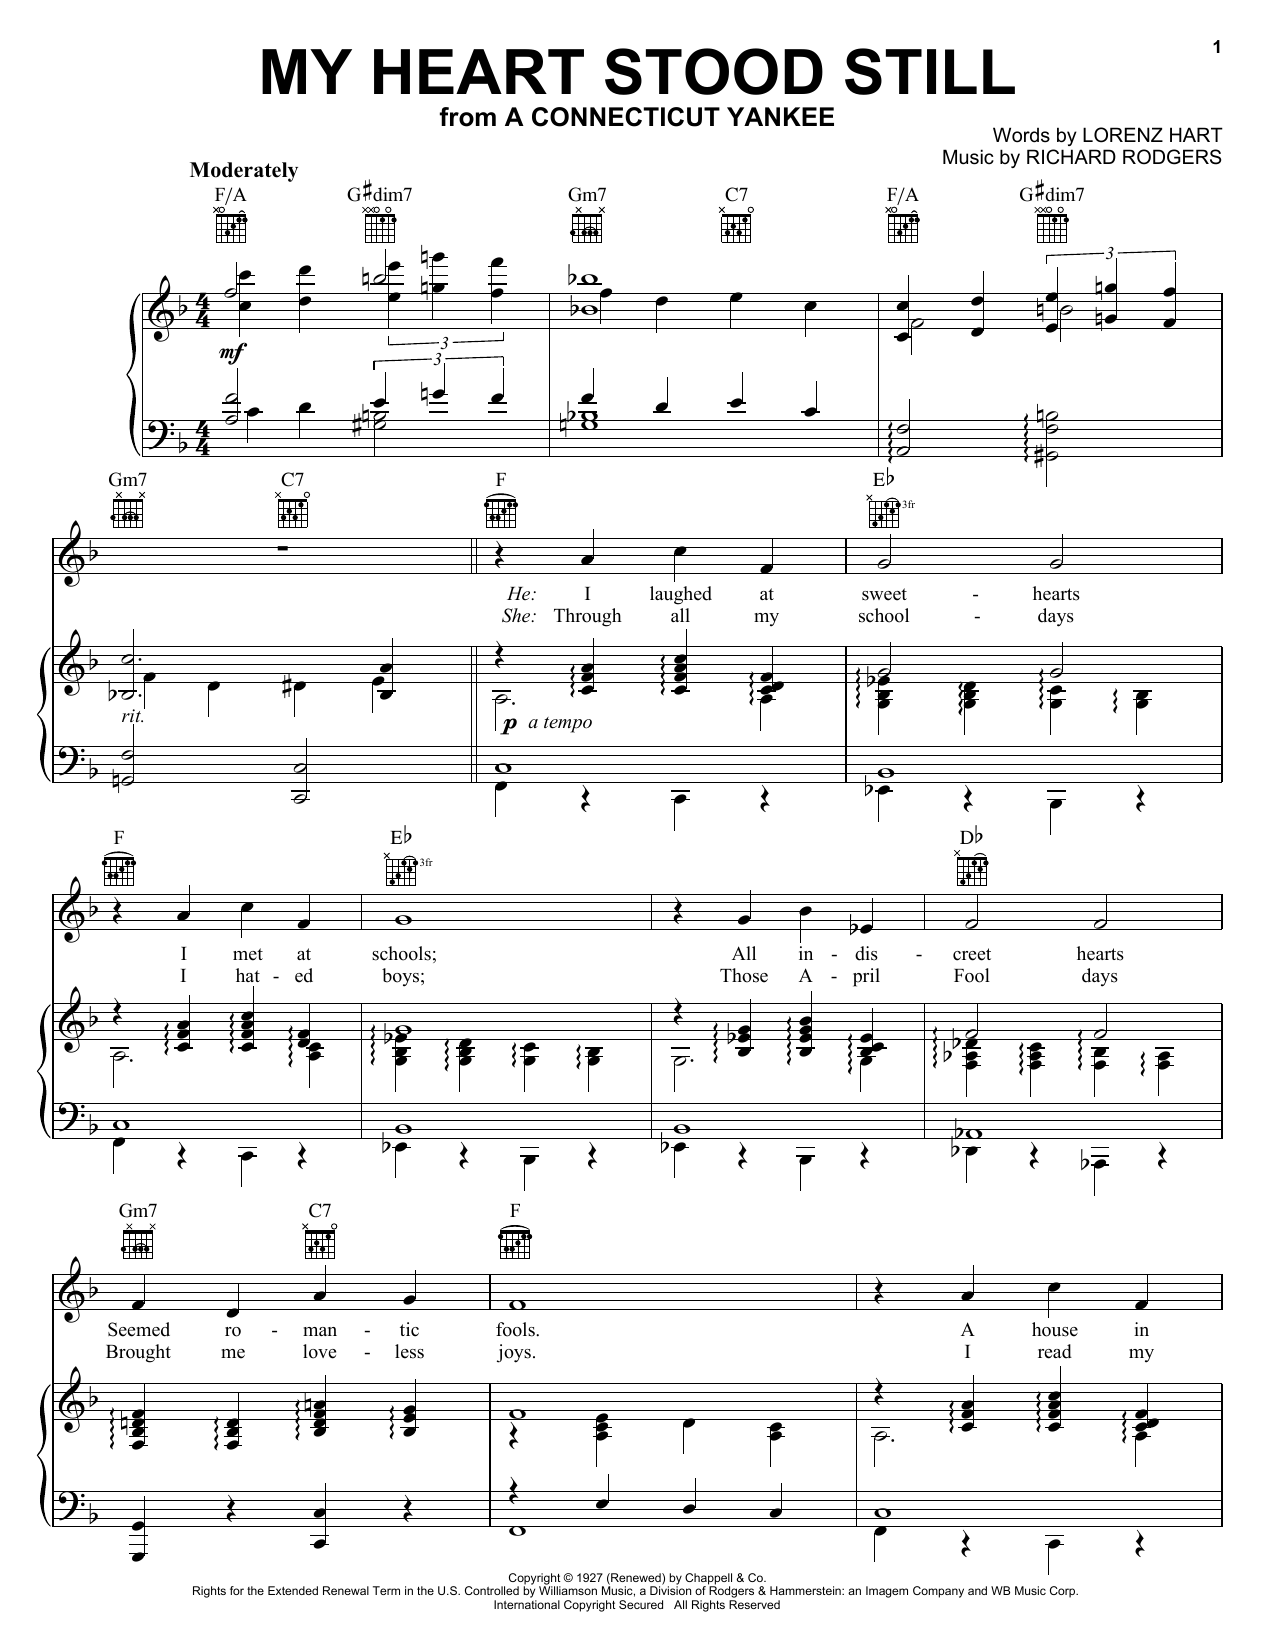 Download Frank Sinatra My Heart Stood Still sheet music notes and chords for Piano, Vocal & Guitar (Right-Hand Melody) - Download Printable PDF and start playing in minutes.